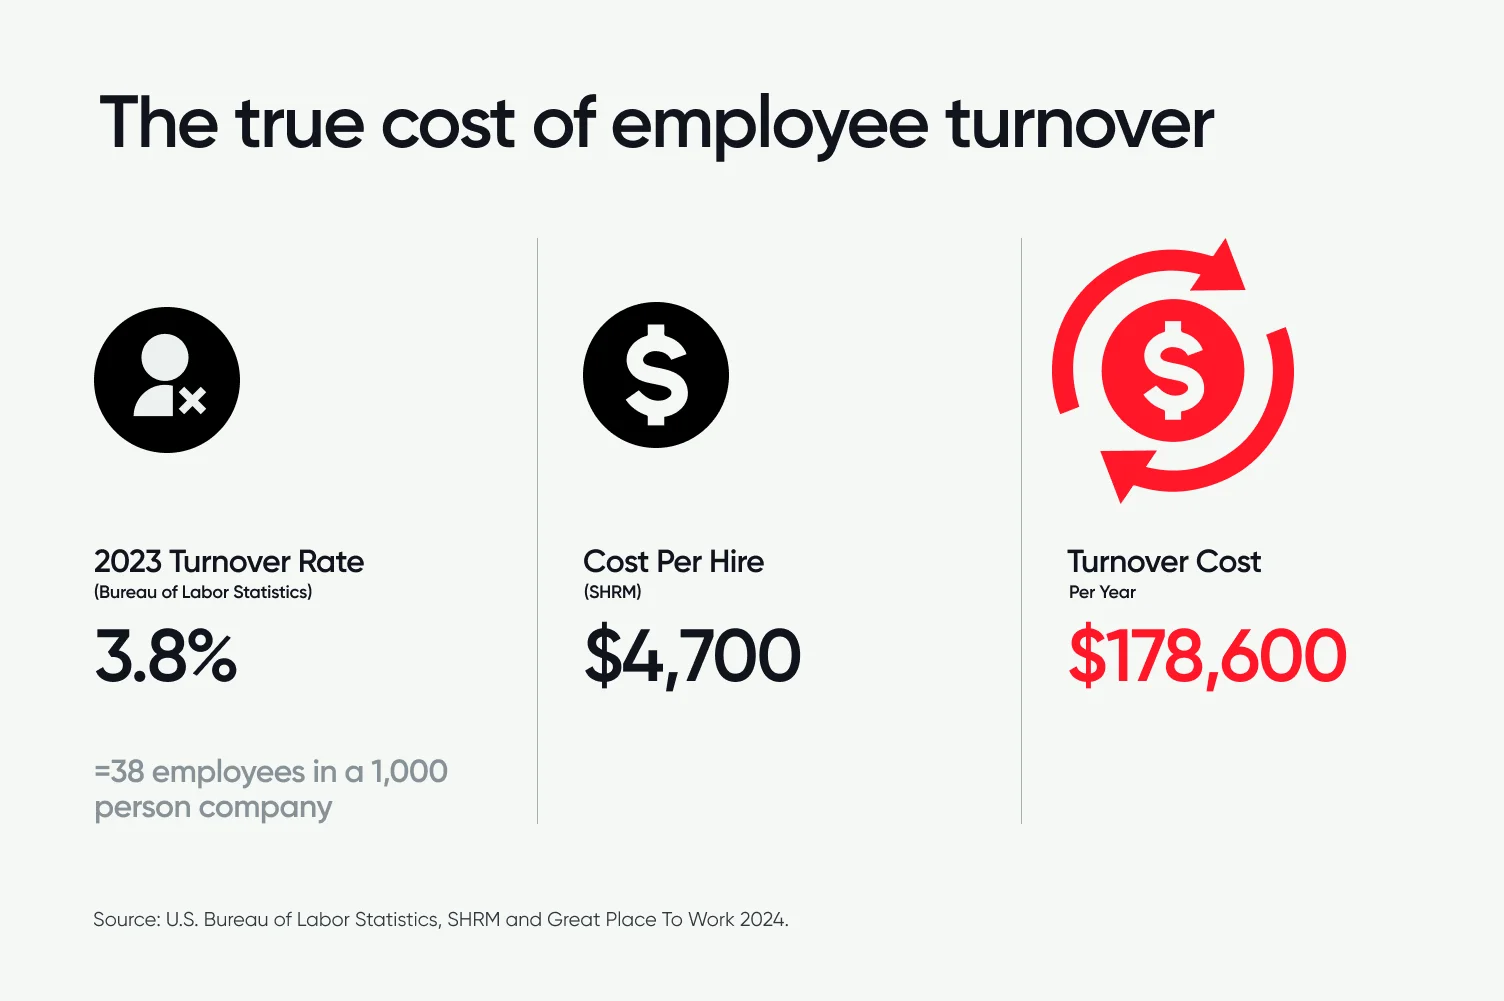 Calculations show that US average turnover rate of 3.8% means 1,000 person organizations cop costs of at least $178,600 per year